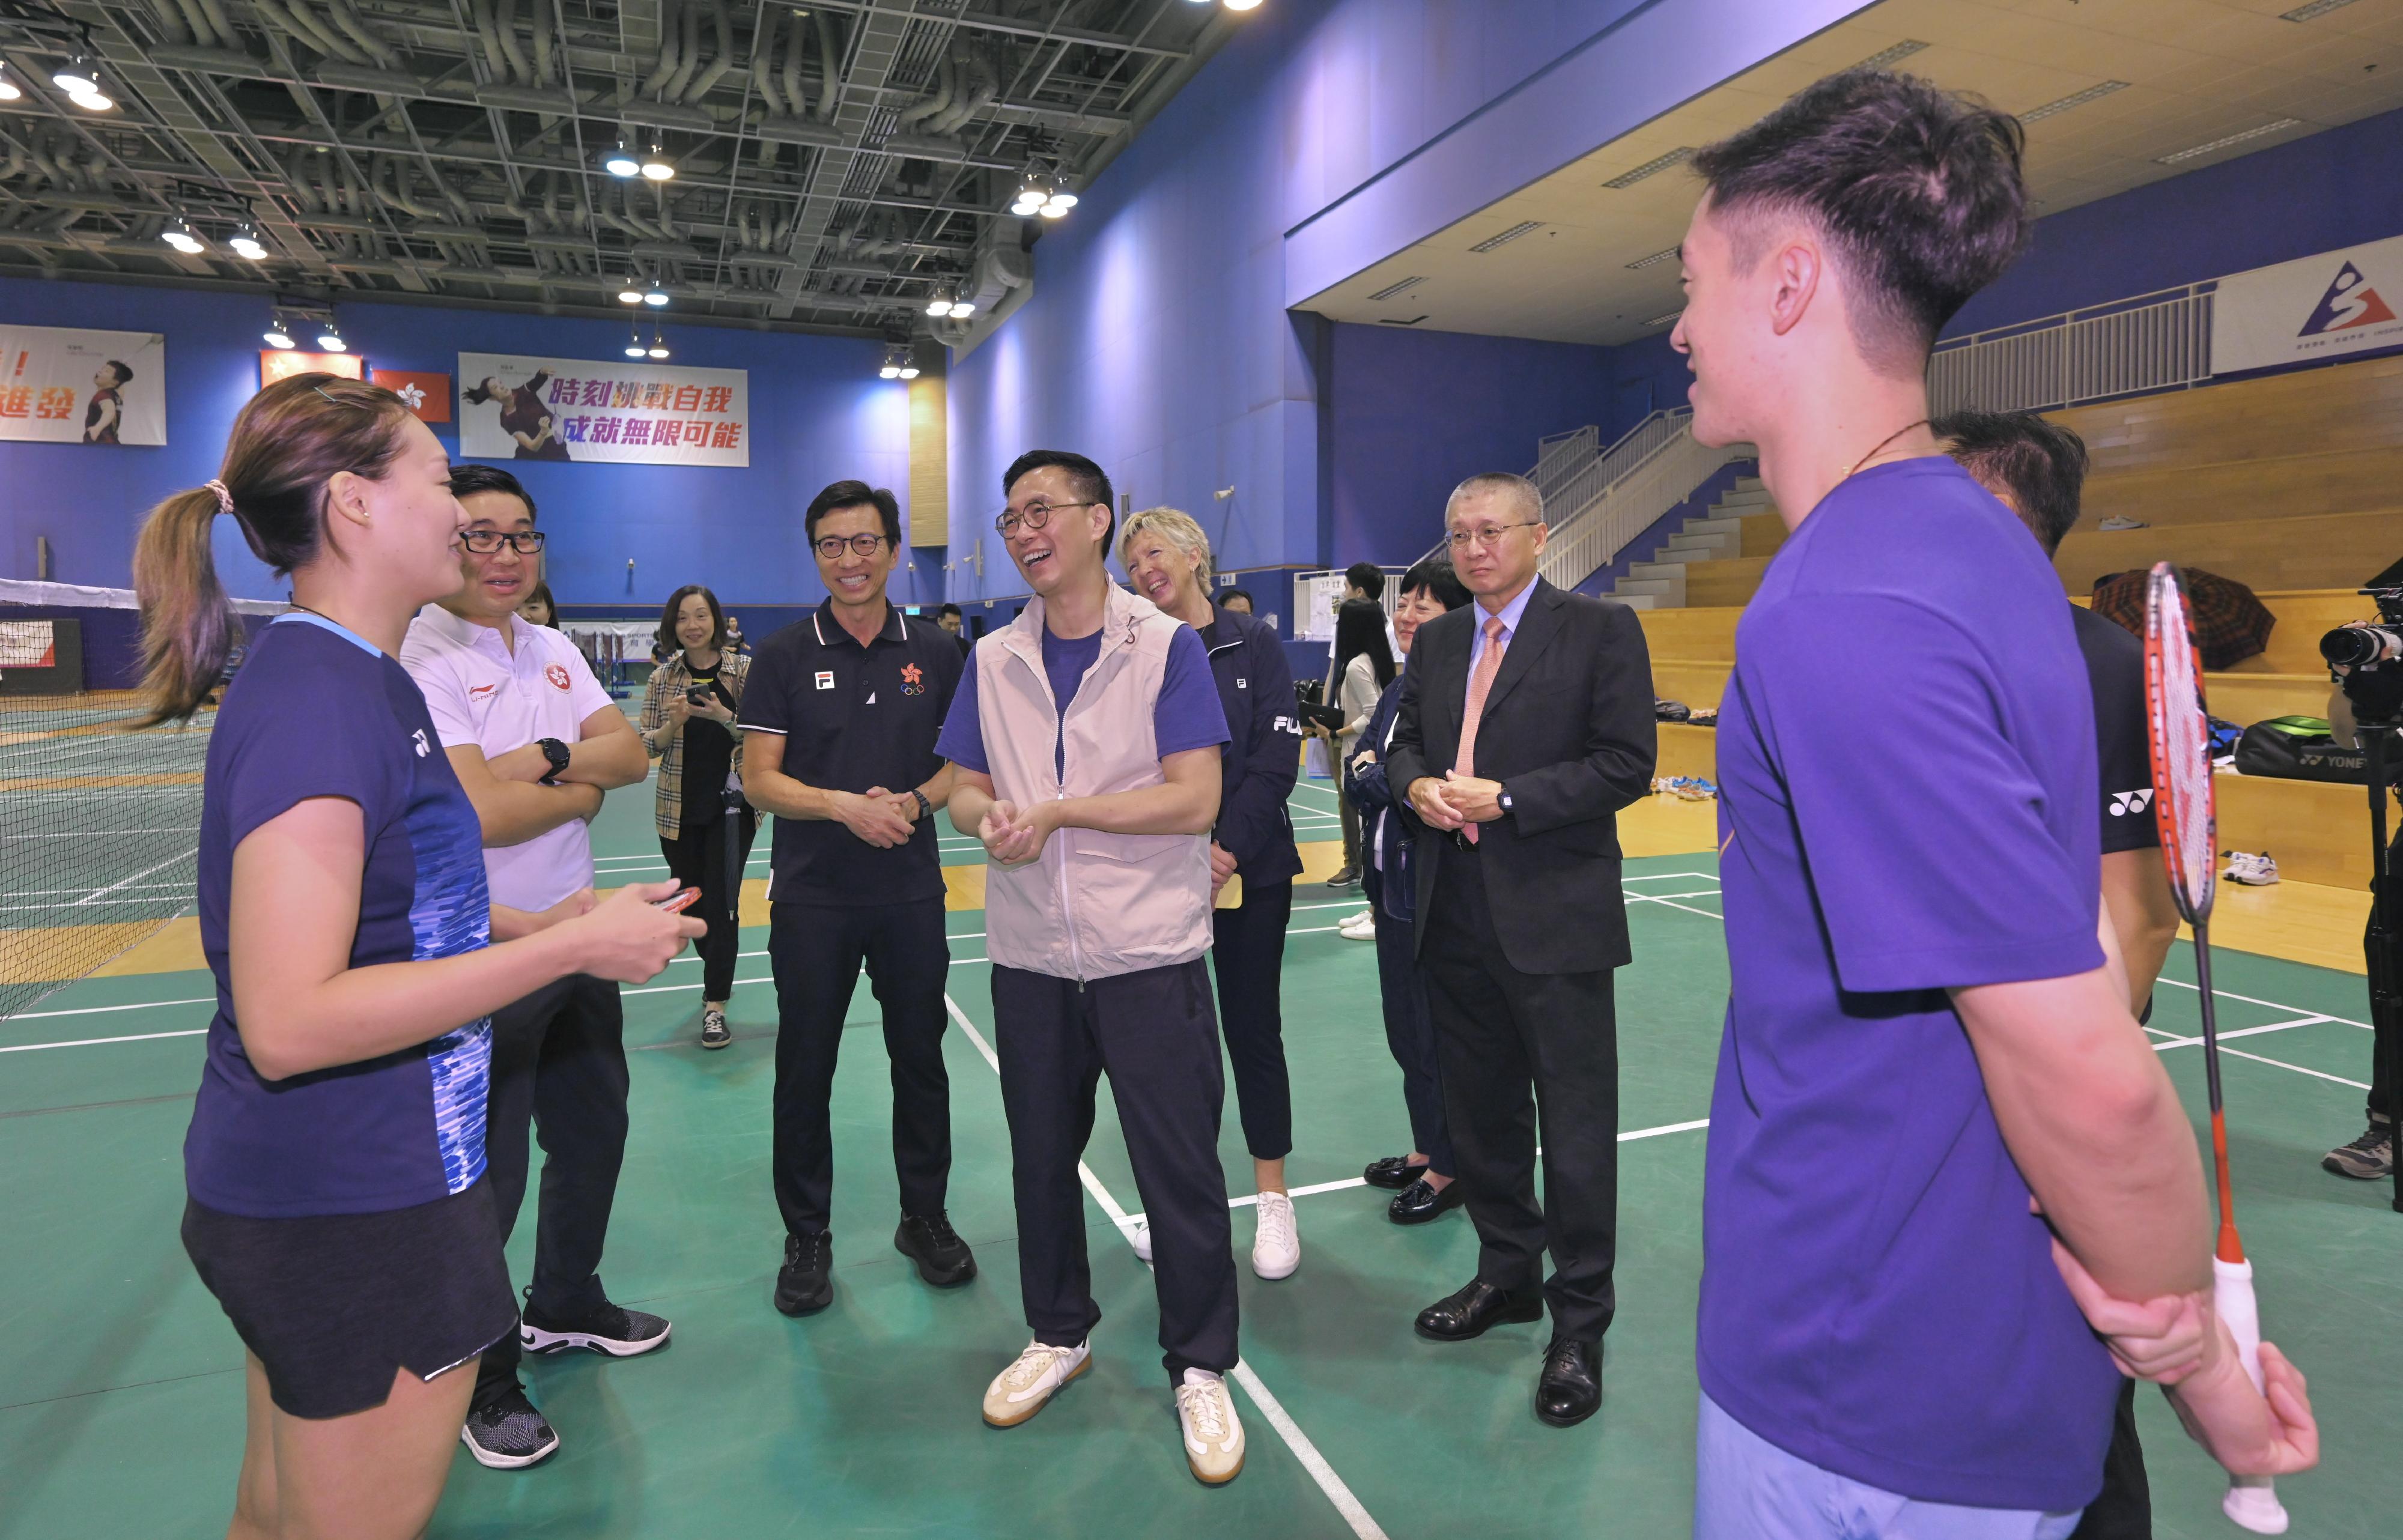 The Secretary for Culture, Sports and Tourism, Mr Kevin Yeung (fourth left), and the Commissioner for Sports, Mr Sam Wong (third left), this morning (September 14) visited the badminton hall in the Hong Kong Sports Institute to exchange with the athletes Tse Ying-suet (first left) and Tang Chun-man (first right).